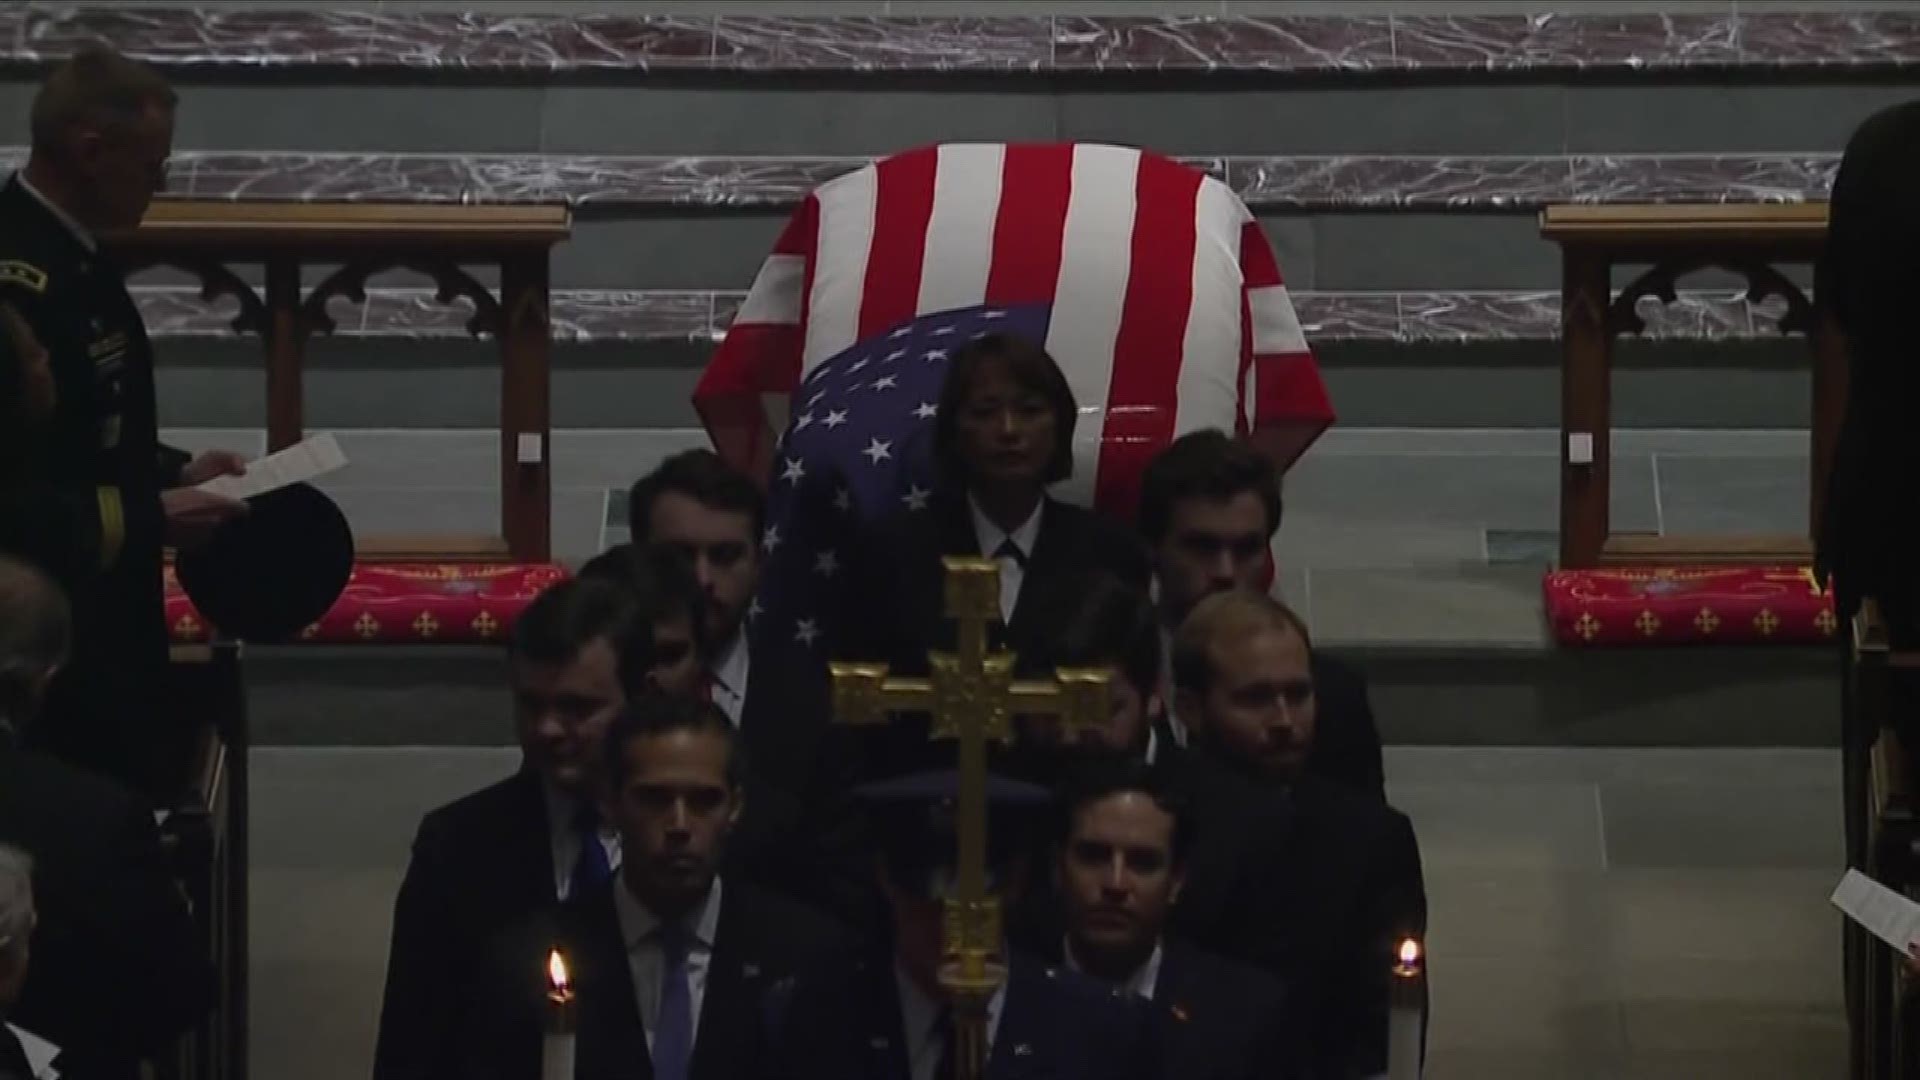 Watch the full video of George H.W. Bush's funeral in Houston on Thursday.